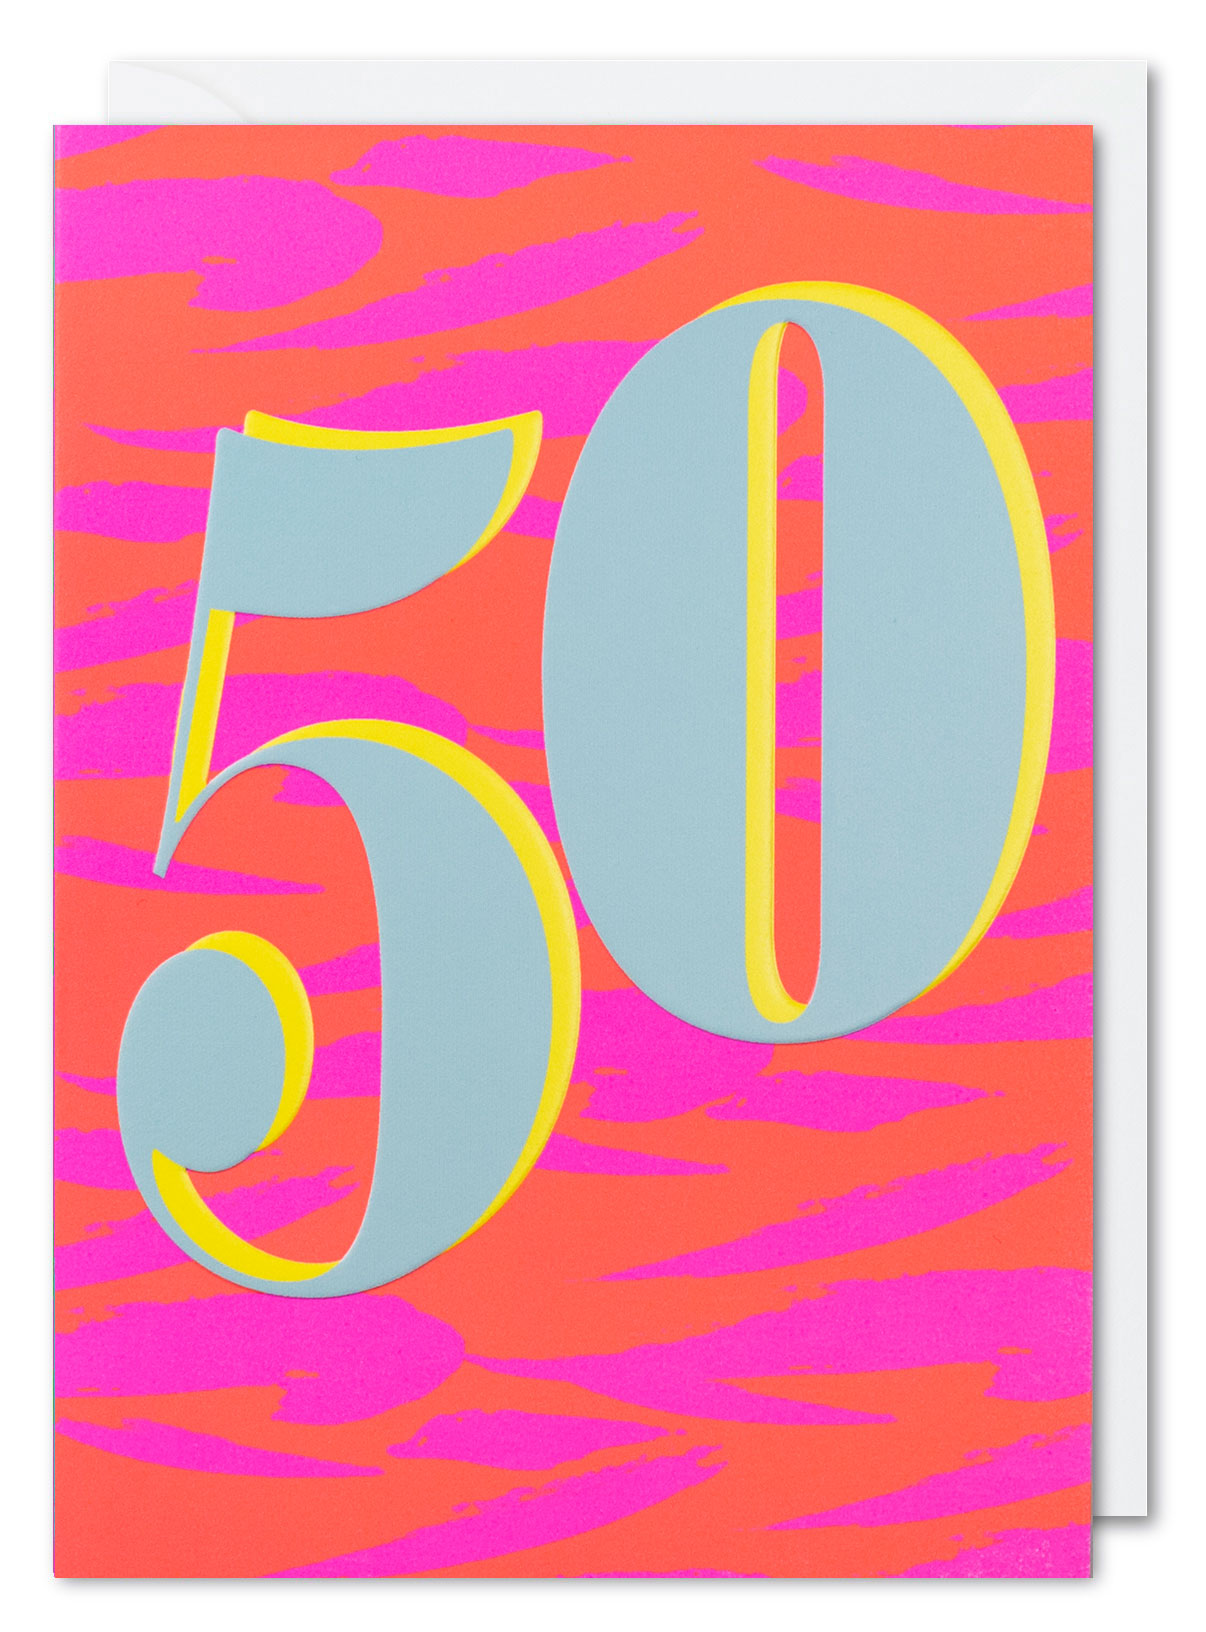 Zesty Graphic 50th Birthday Card from Penny Black